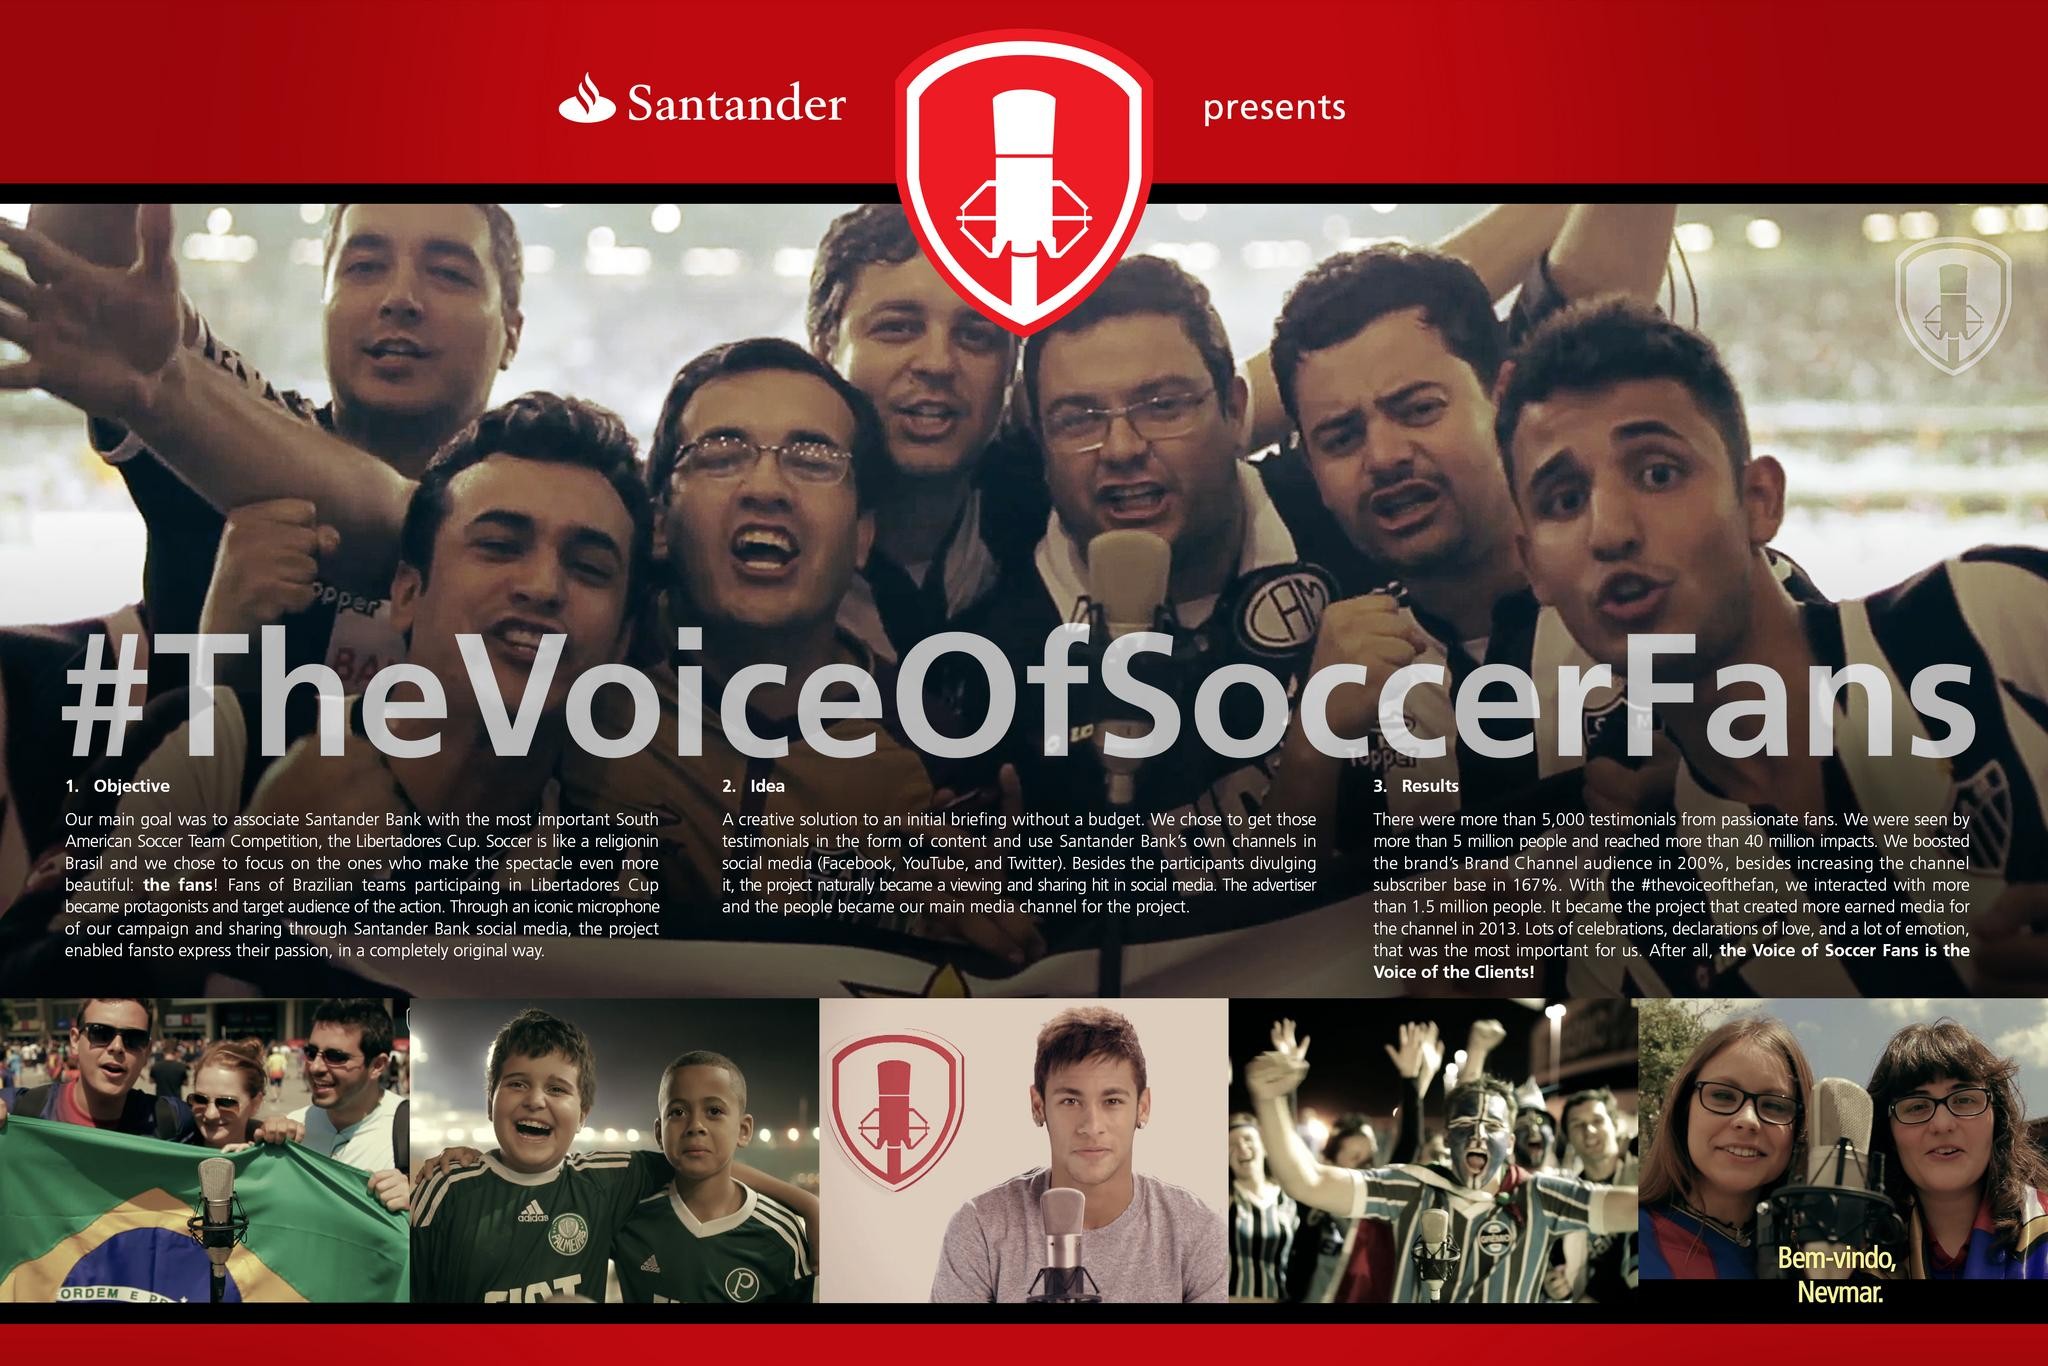 #THE VOICE OF SOCCER FANS